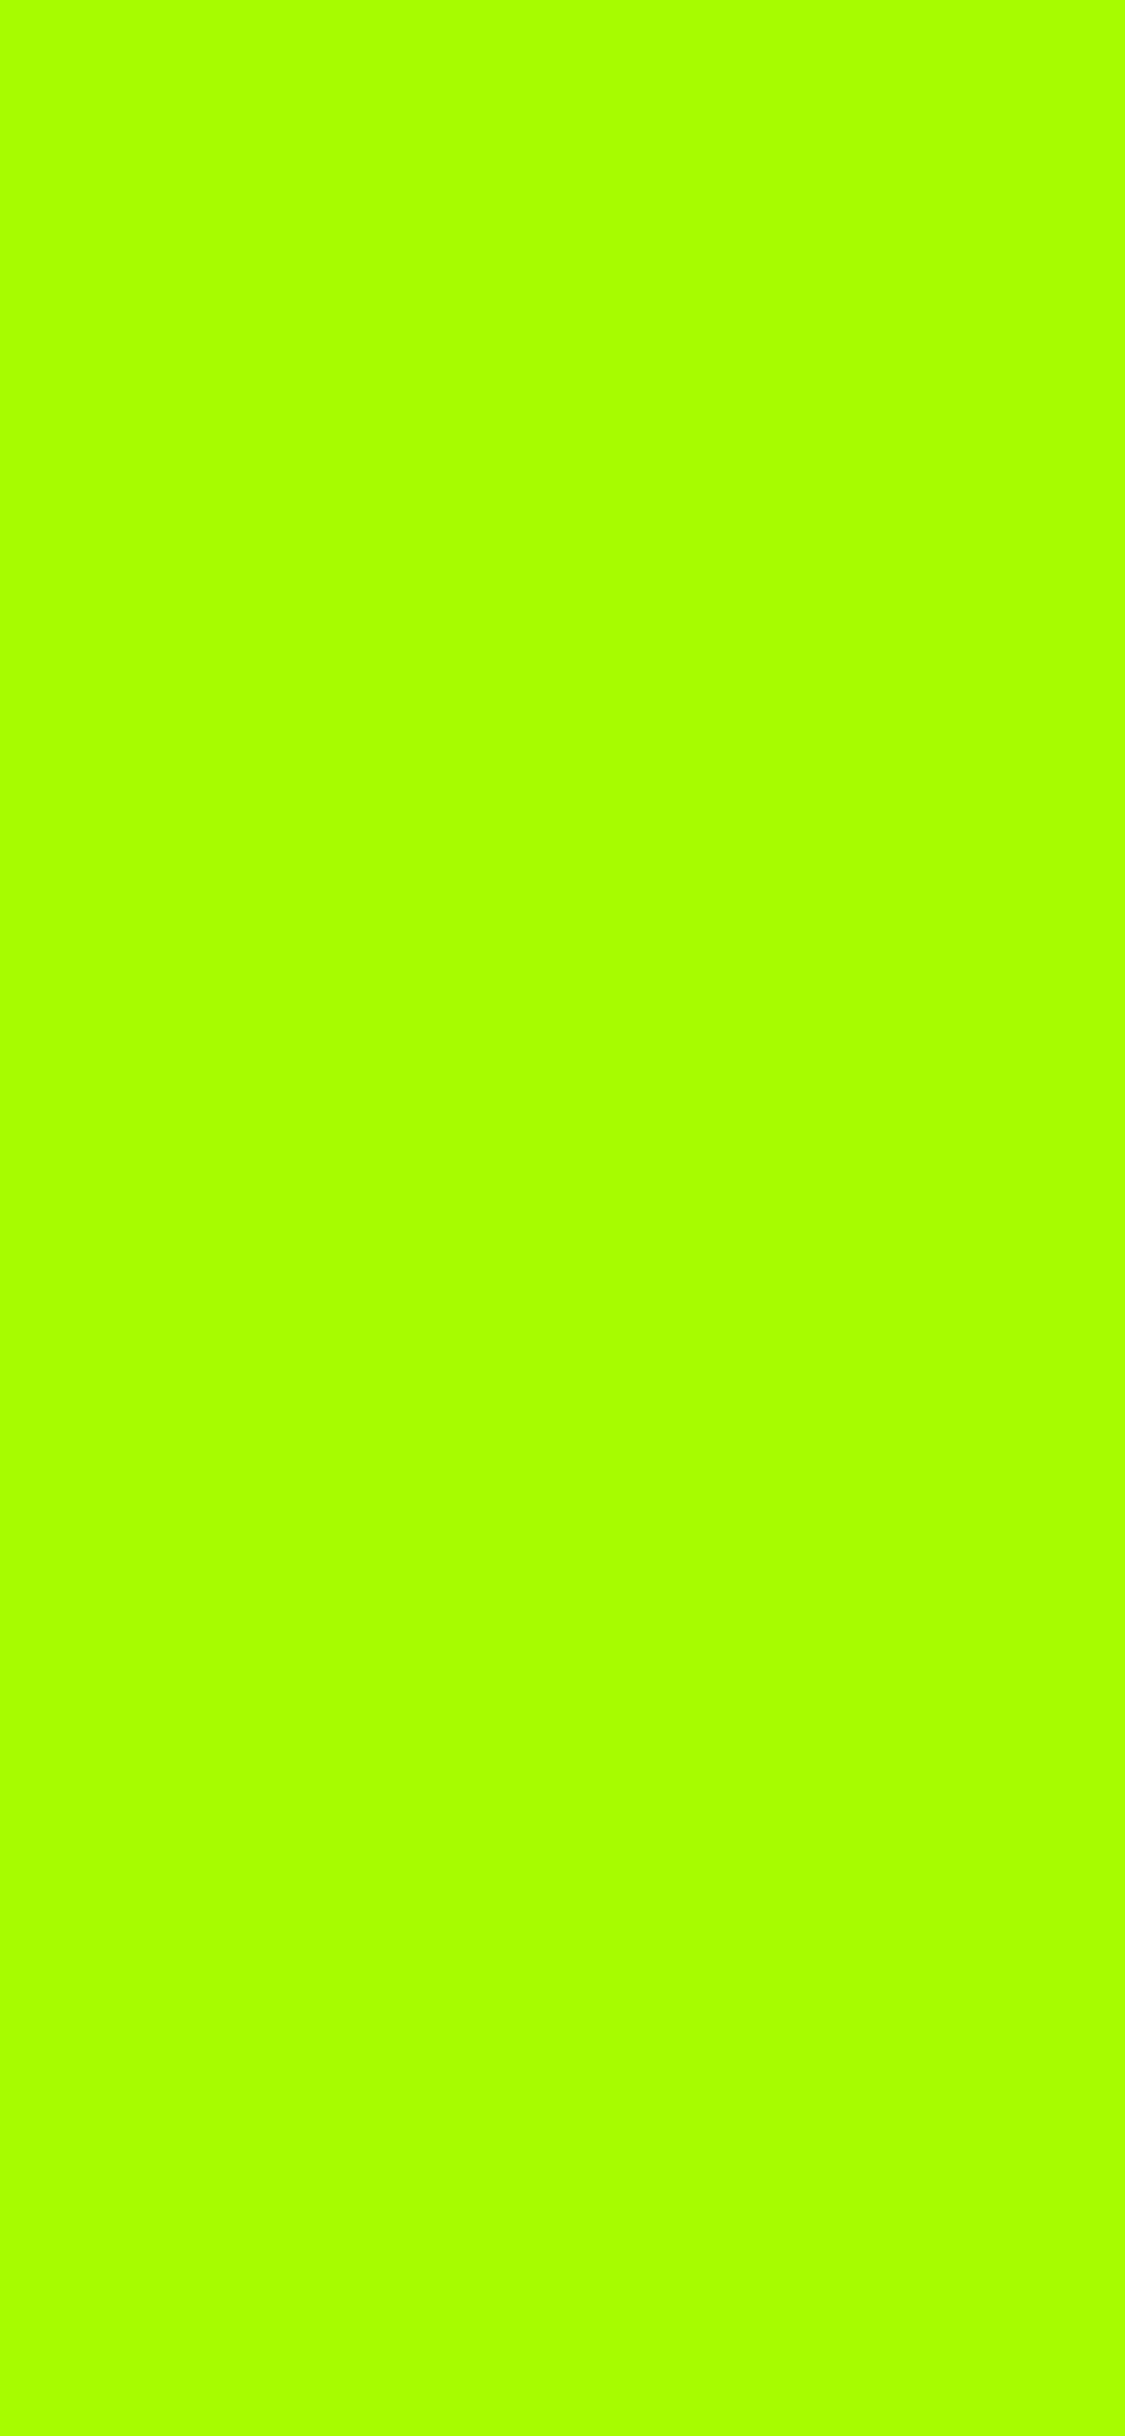 1125x2436 Spring Bud Solid Color Background